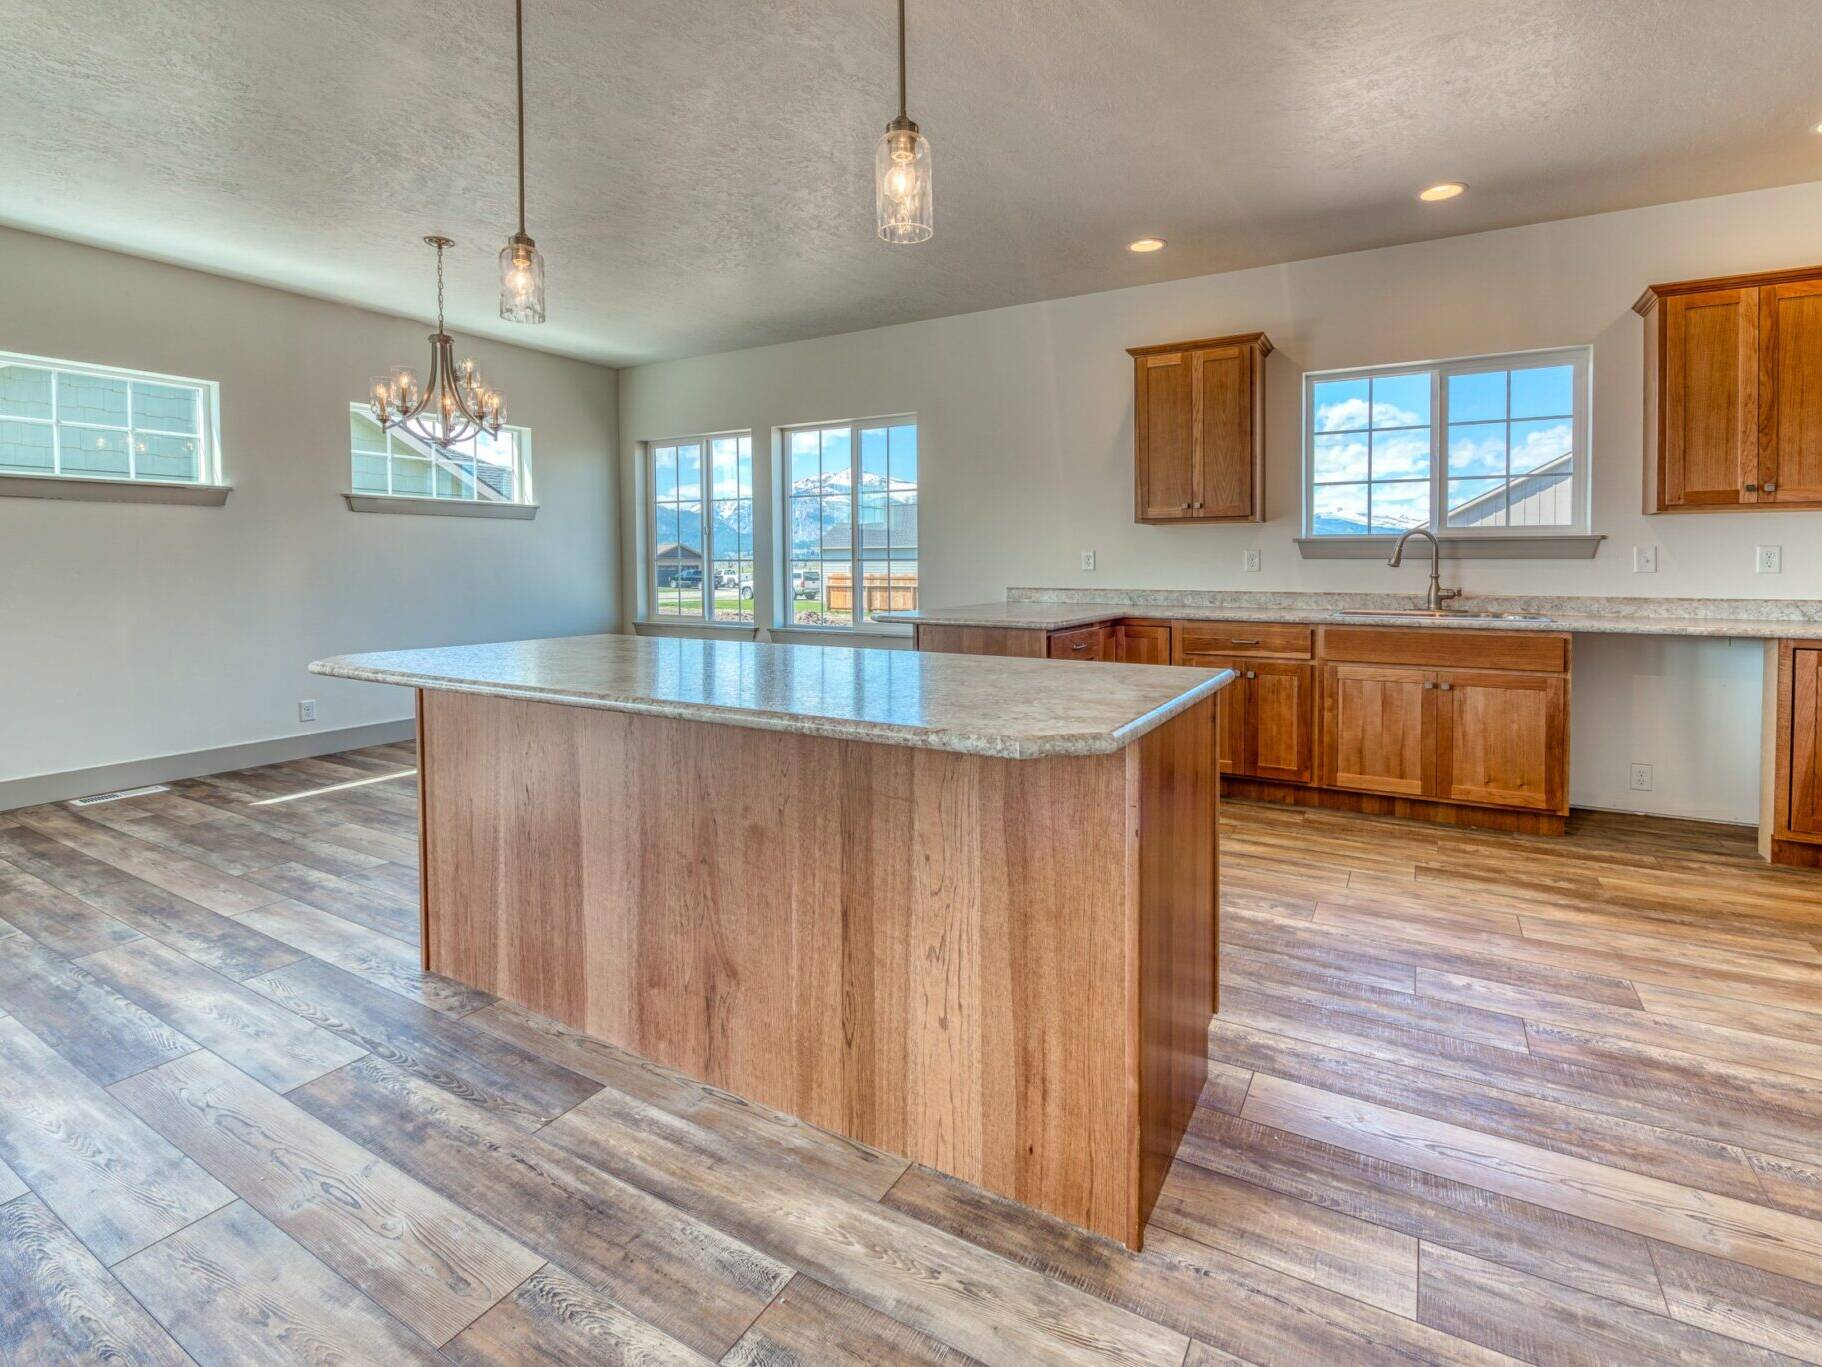 Kitchen area in the Country Cottage model home - built by Big Sky Builders in Hamilton, MT